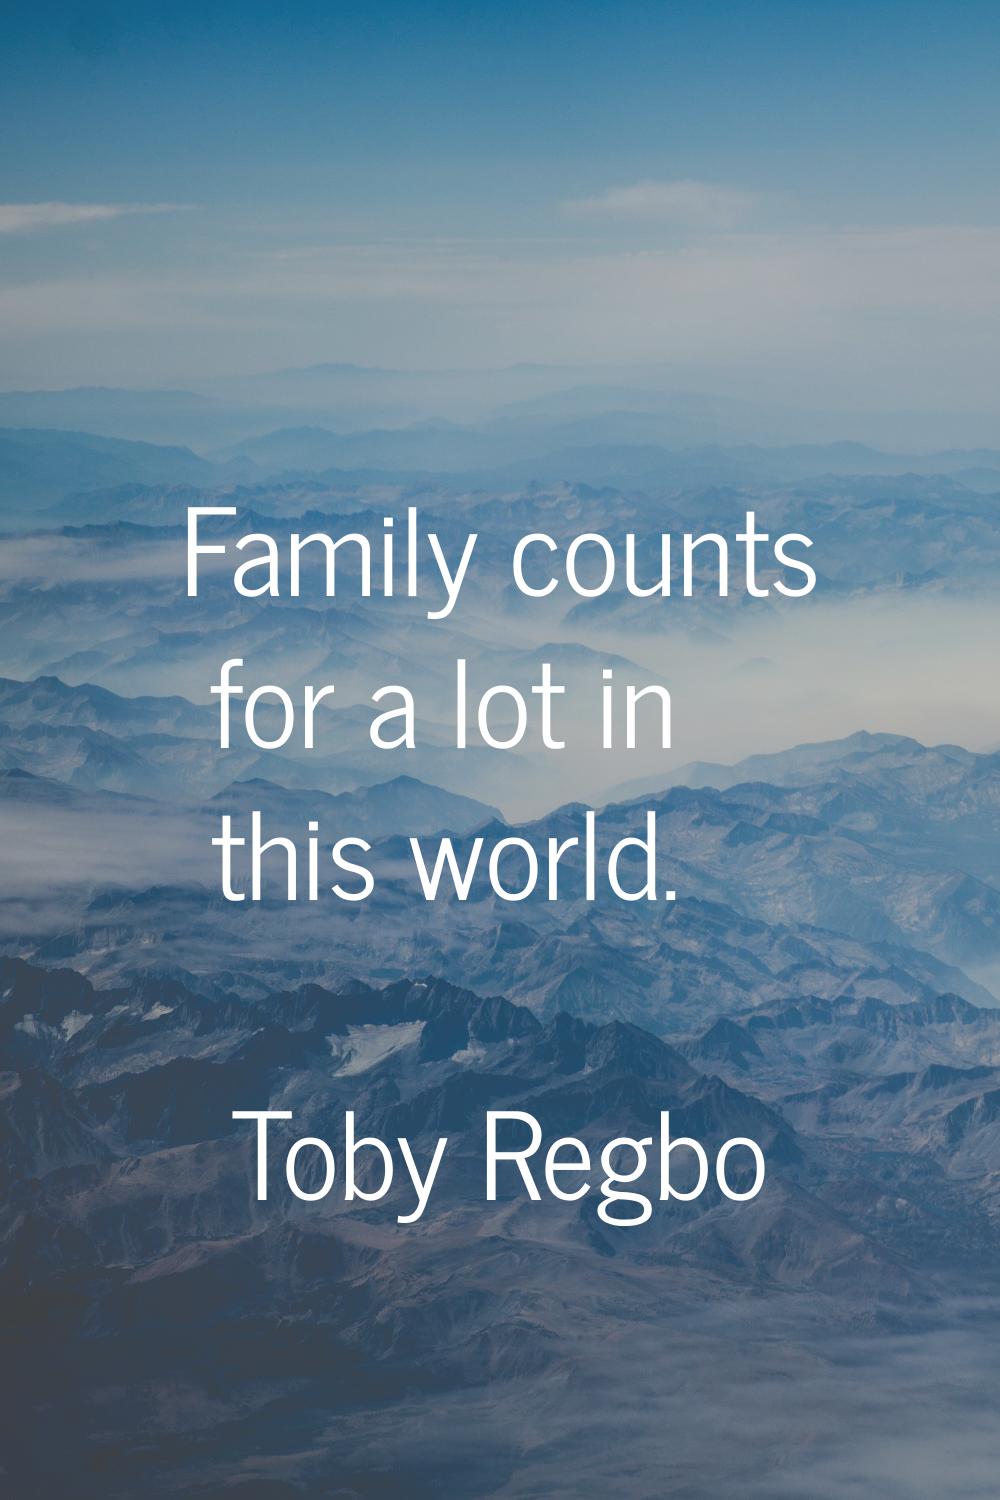 Family counts for a lot in this world.